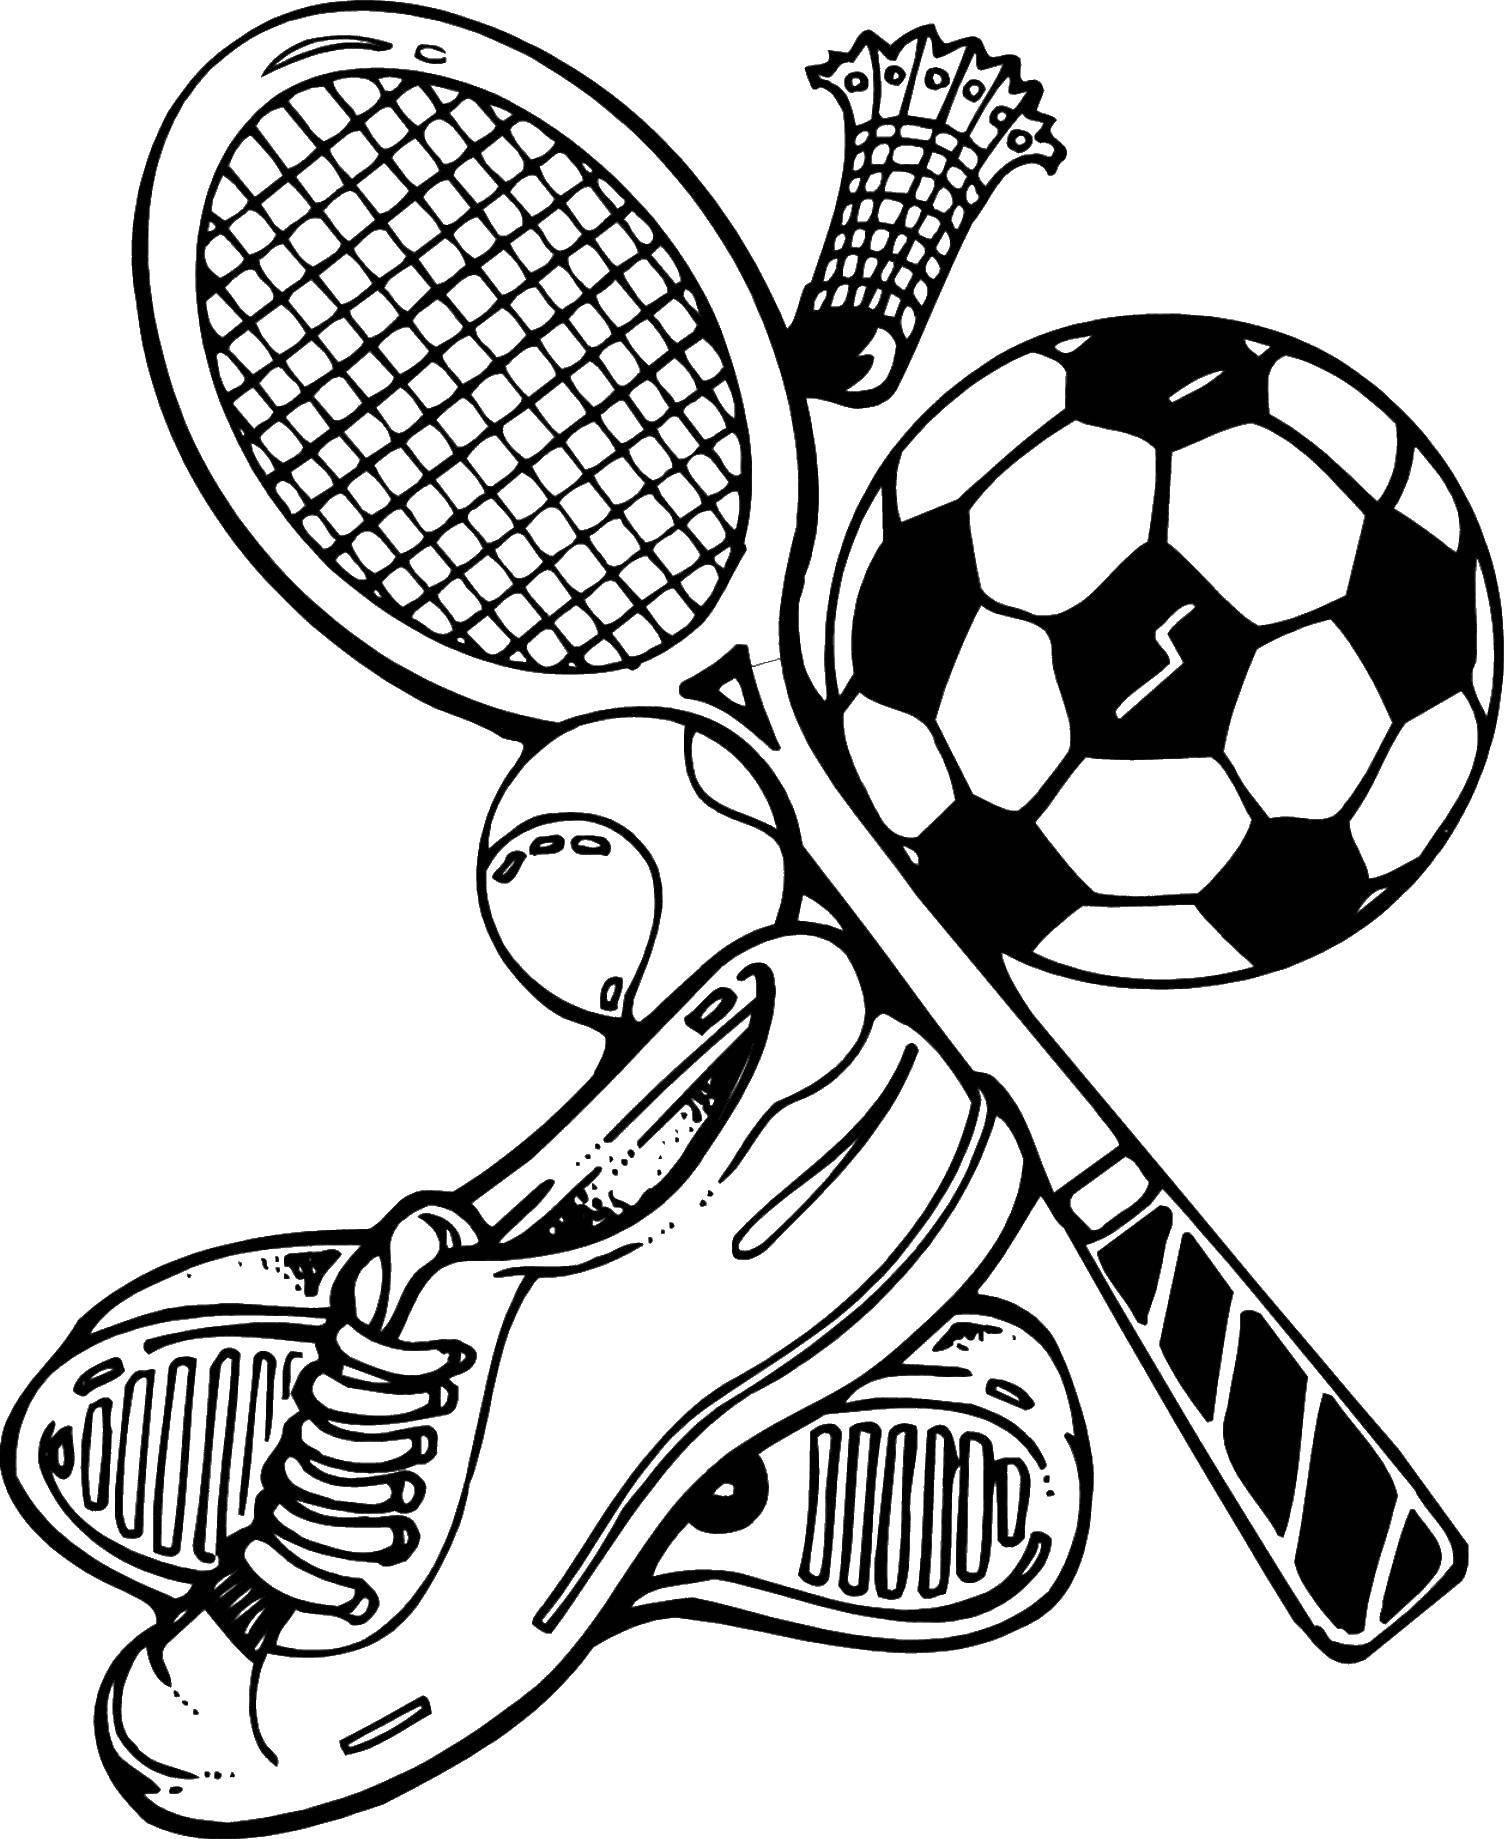 Coloring Tennista racket, soccer ball, sneakers. Category Sports. Tags:  sports, Tennista racket, soccer ball, sneakers.